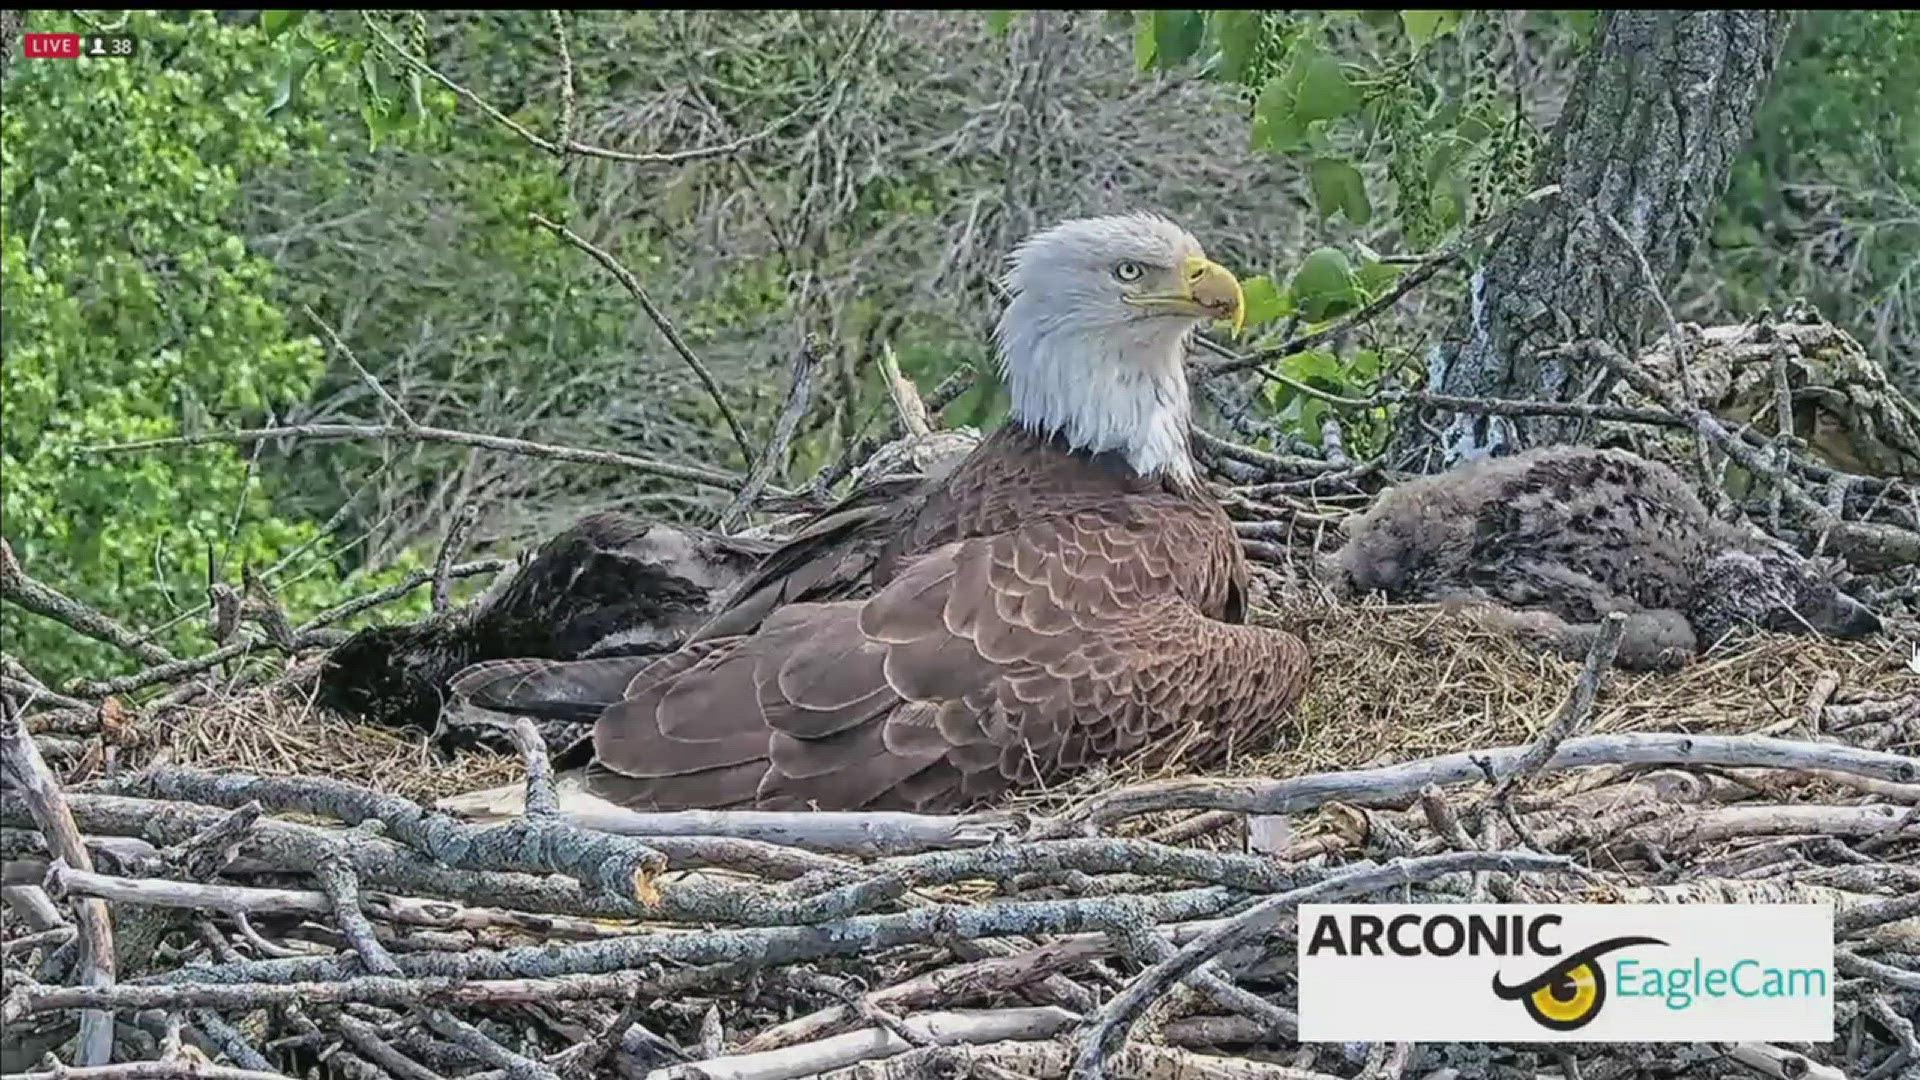 The eaglets were born in early April. Their parents, Liberty and Justice, first made their nest near the Arconic plant in 2009.